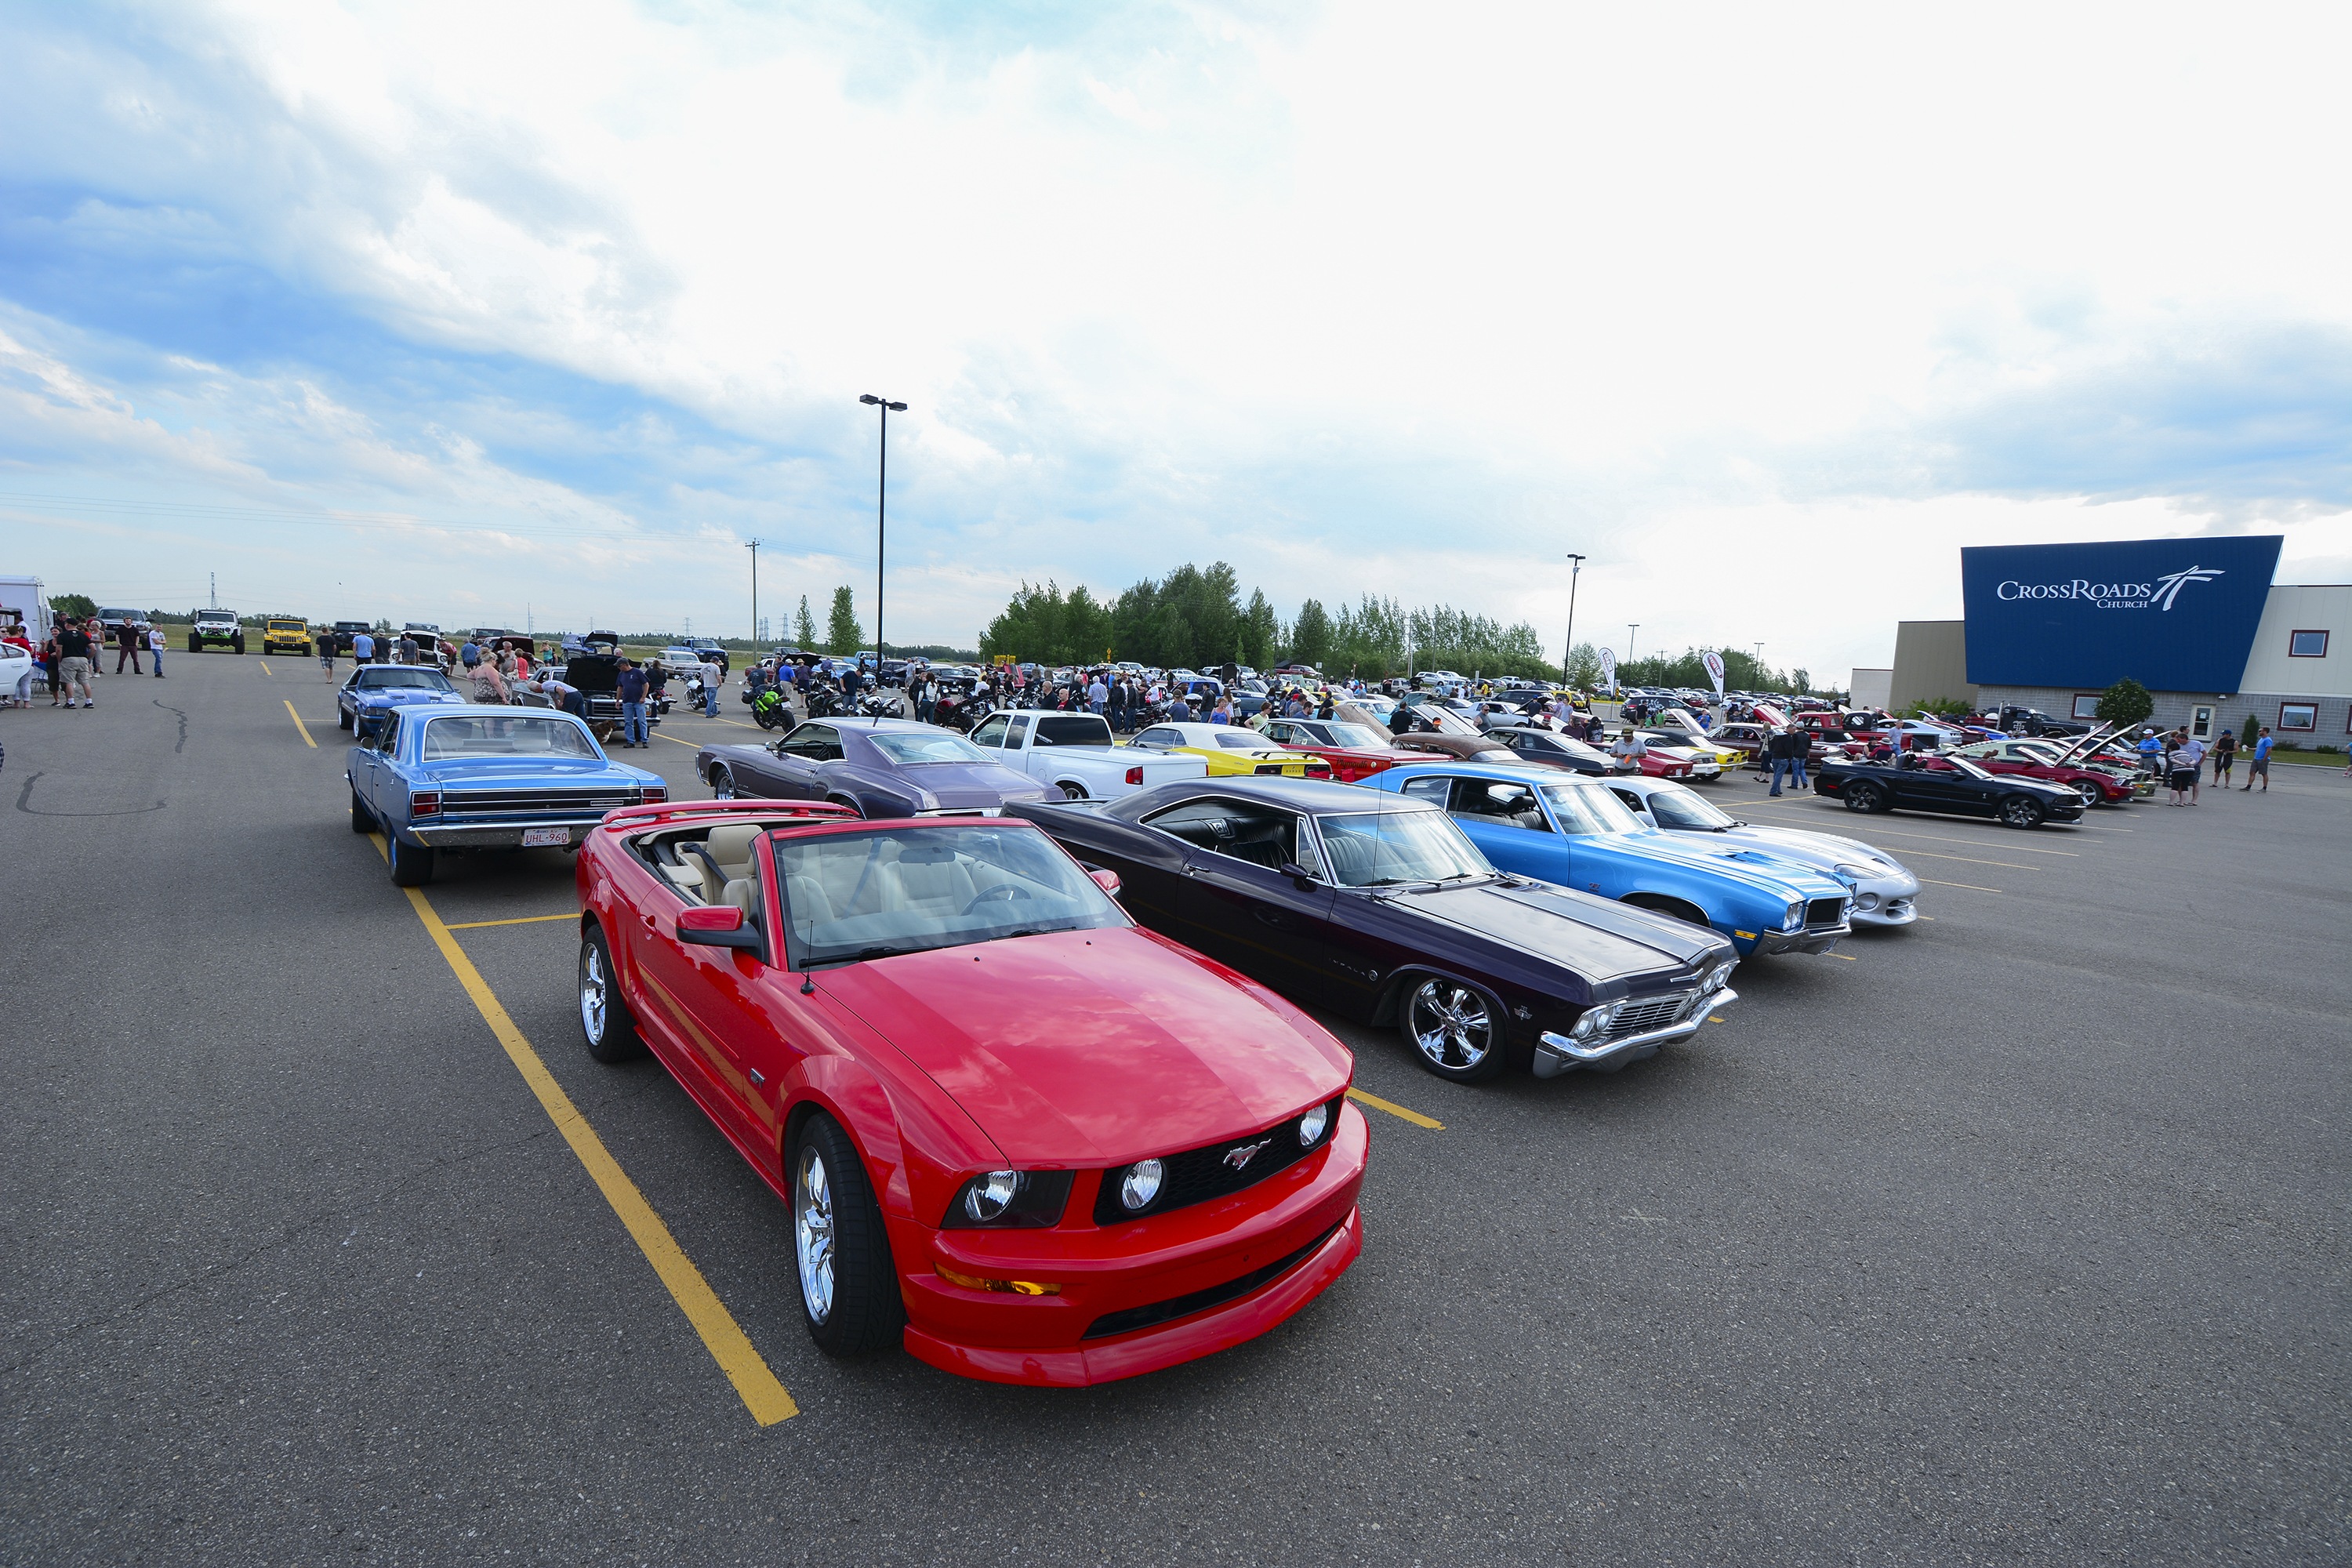 NEW HOME - Red Deer Cruise Night kicked off in their new location Thursday night in the parking lot of Crossroads Church. The weekly event draws viewers from across North America.